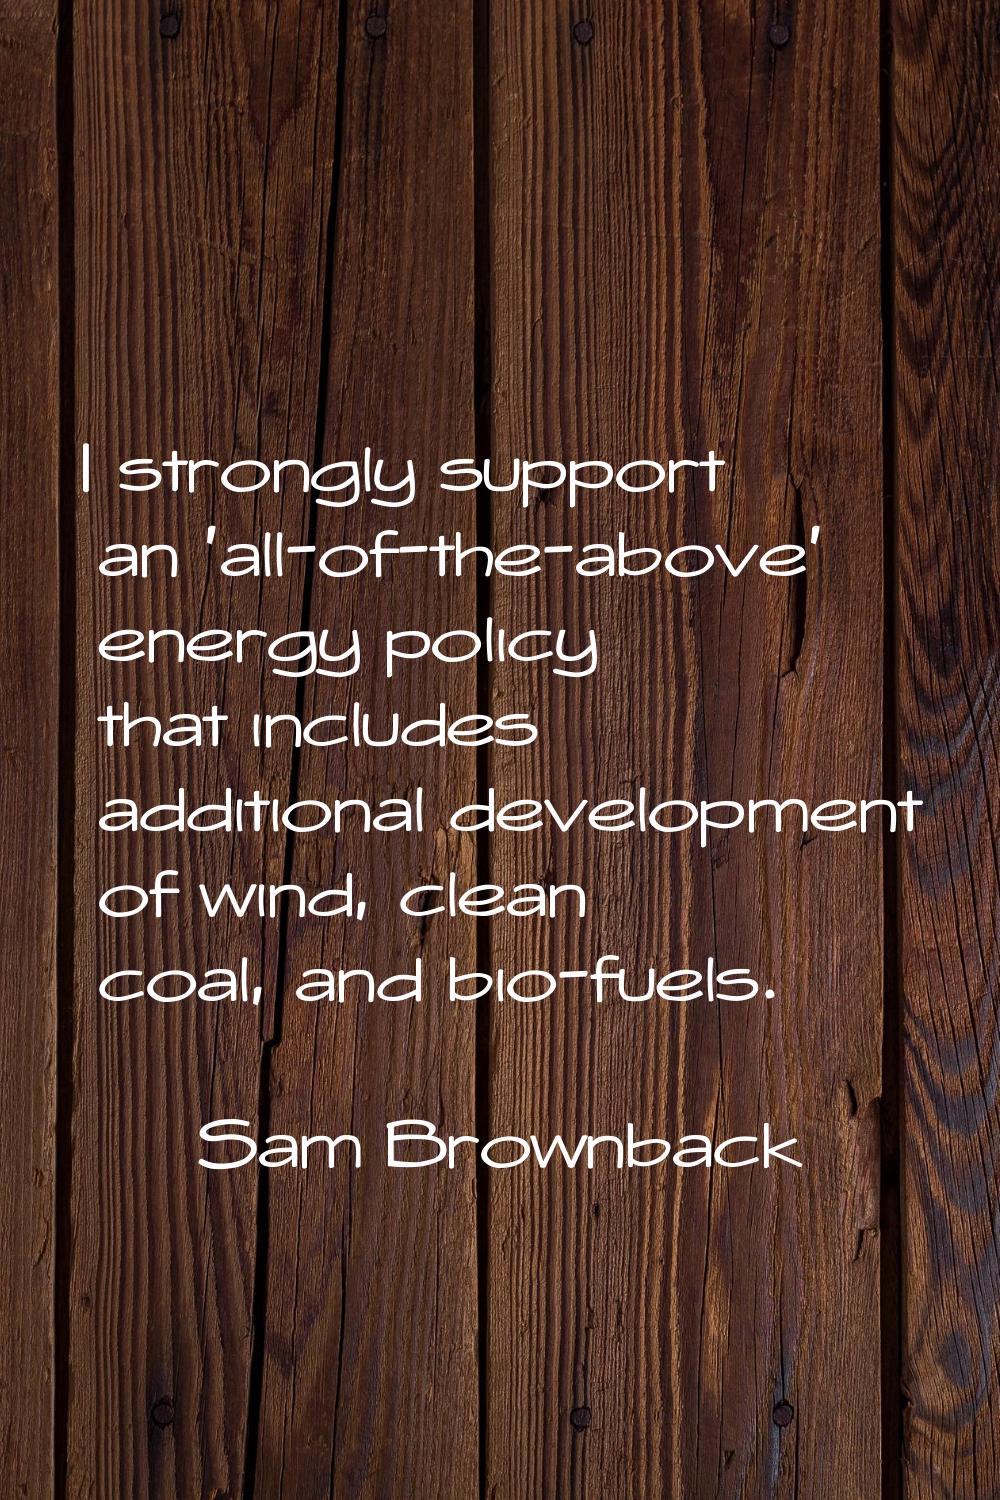 I strongly support an 'all-of-the-above' energy policy that includes additional development of wind